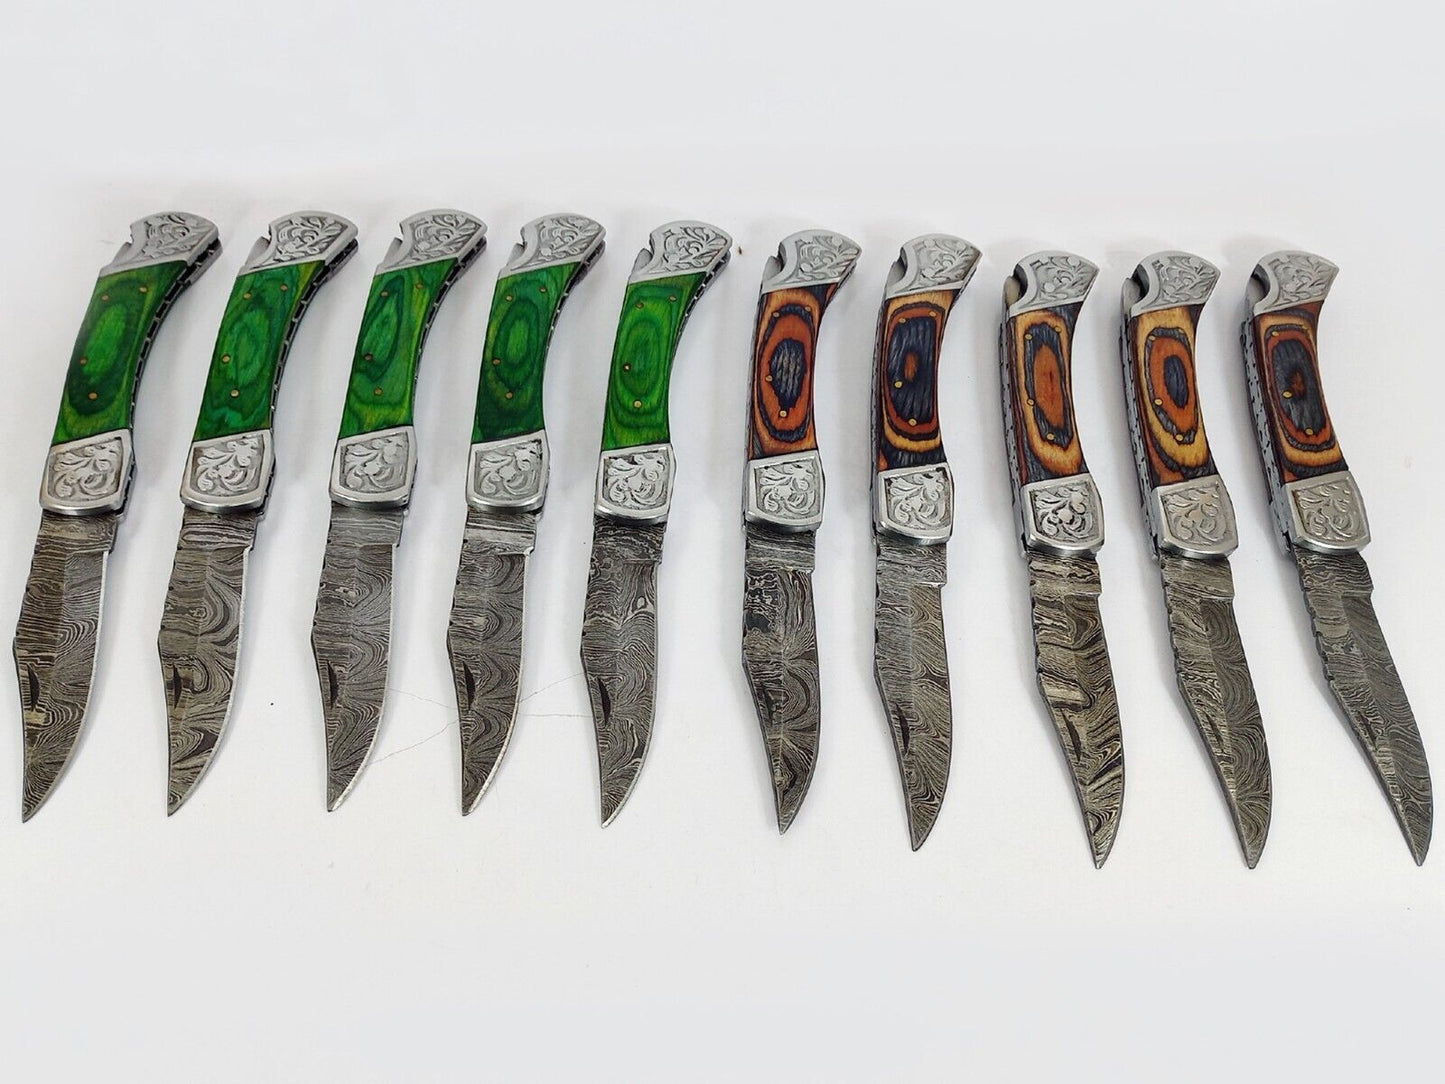 20 pieces lot of Damascus steel Back lock folding knife with Leather Sheath, Assorted color scales